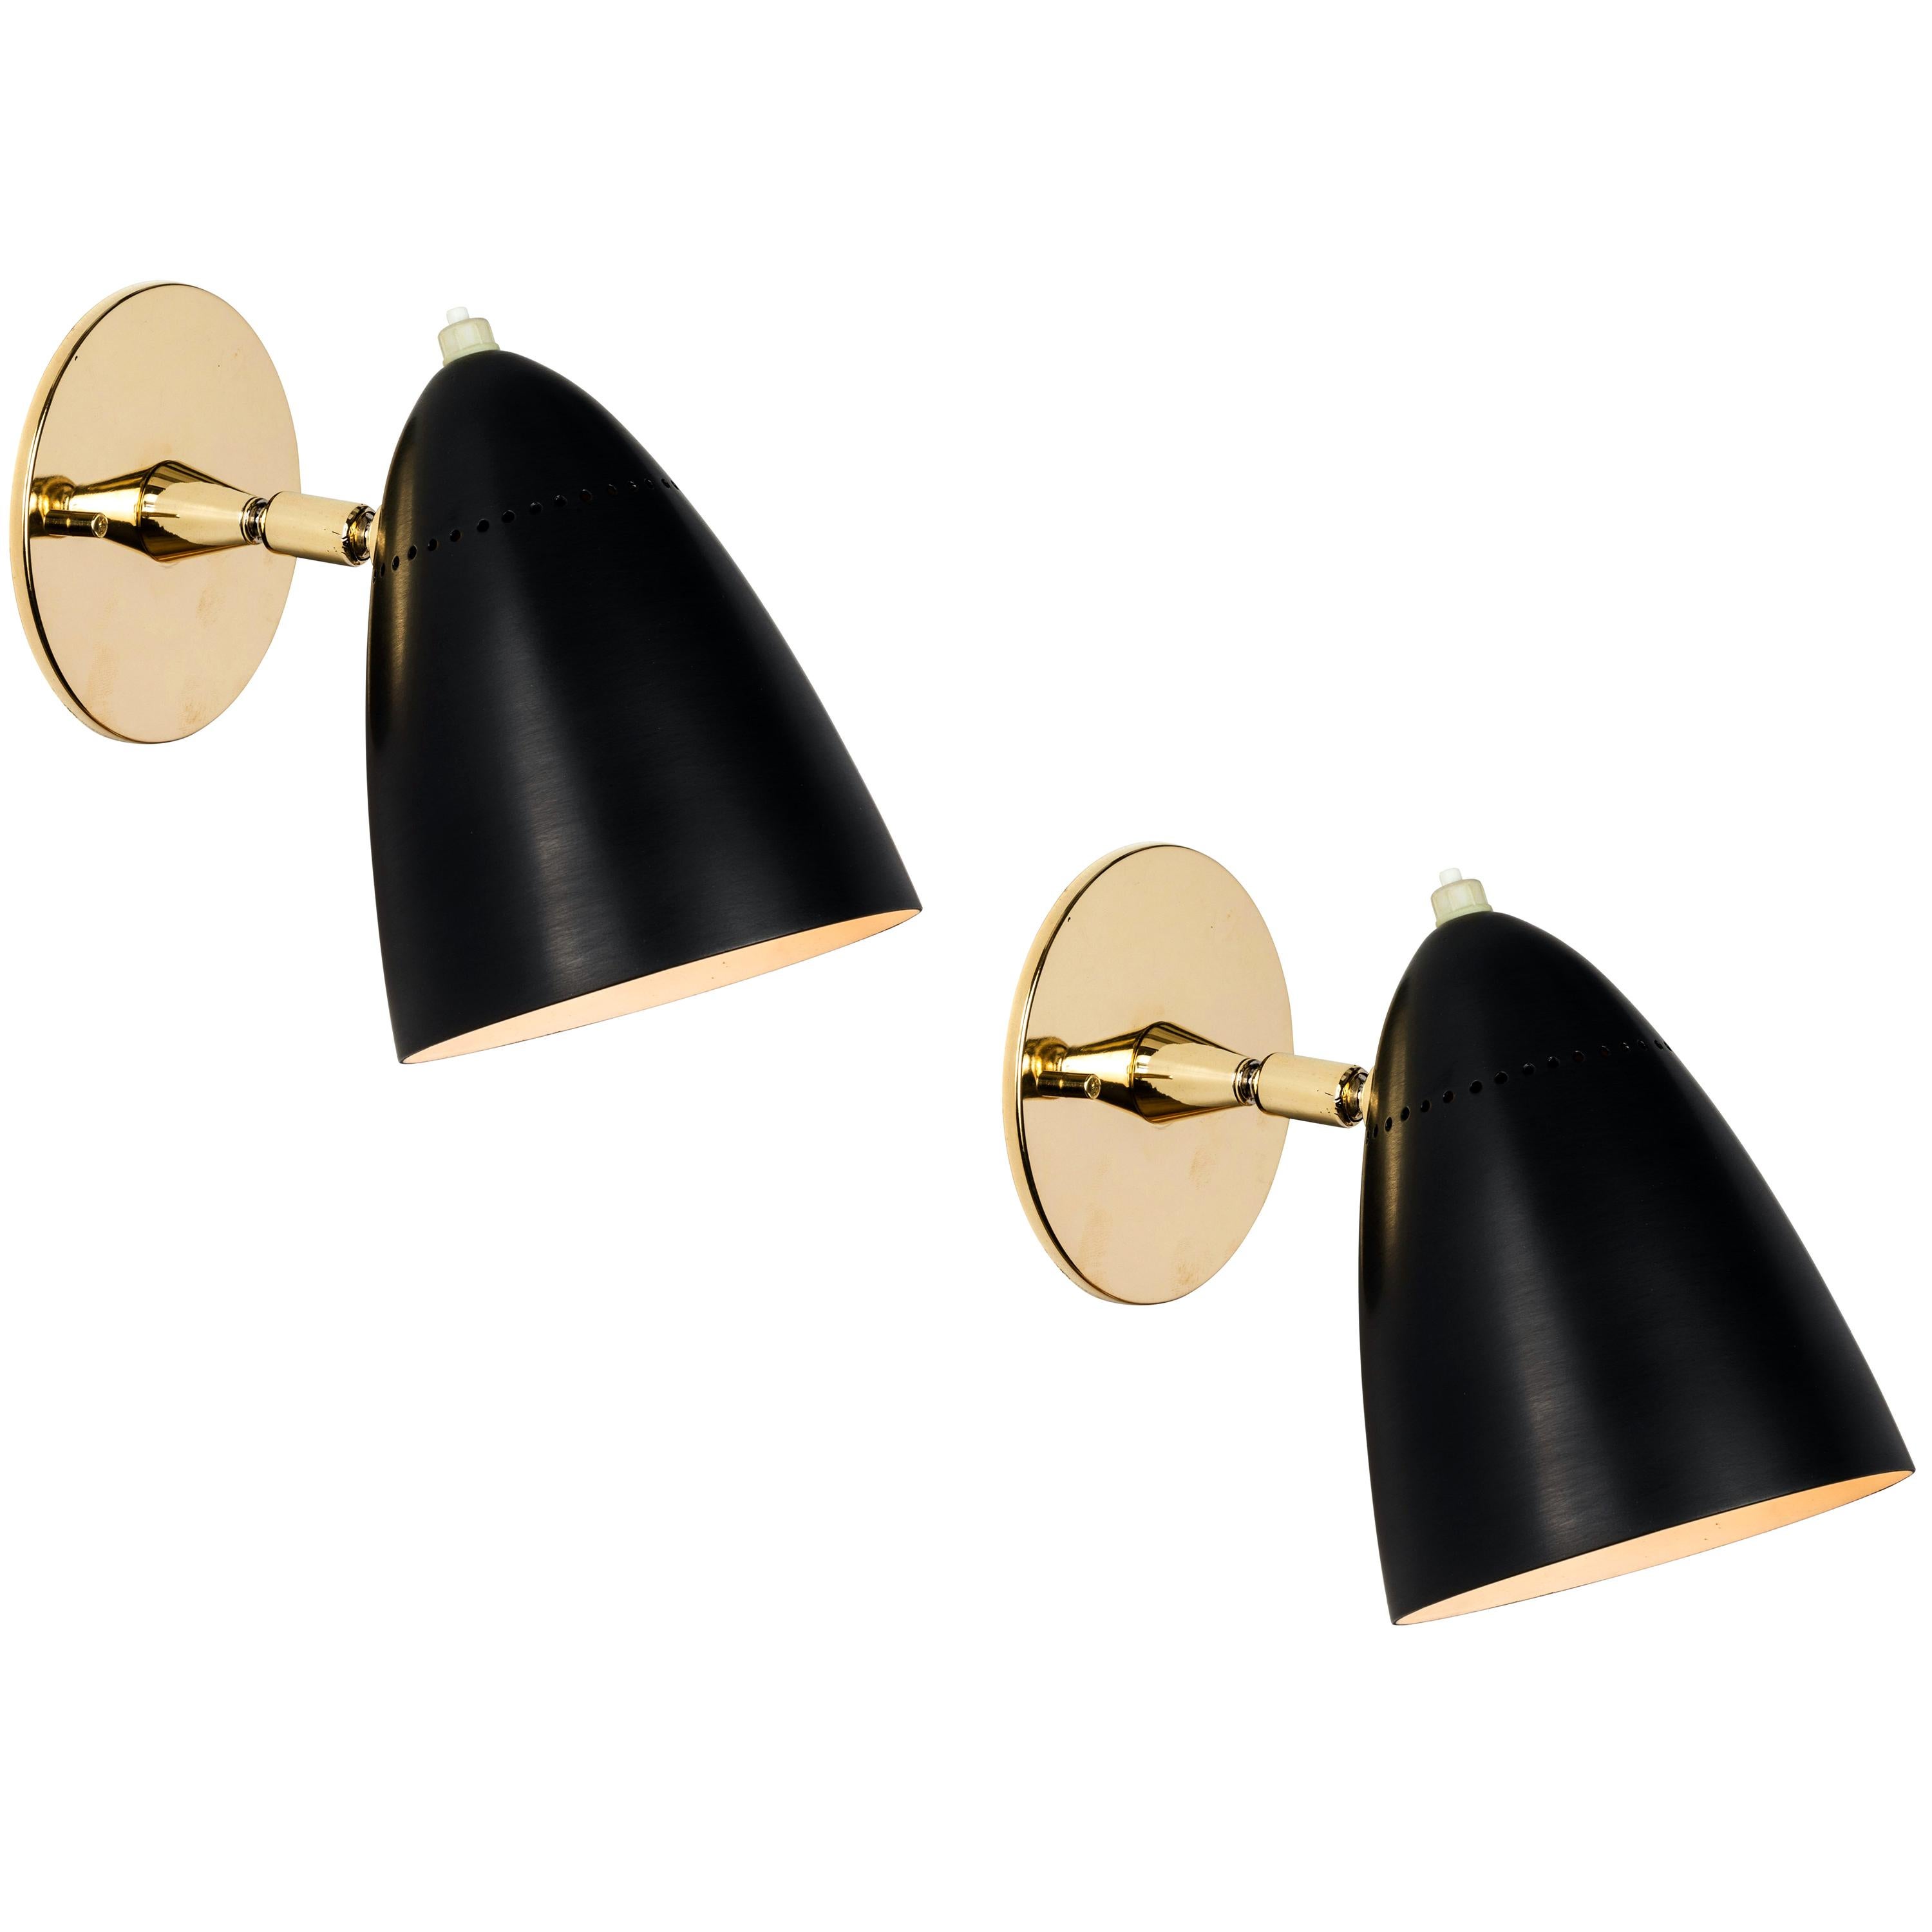 Pair of 1950s Sconces by Gino Sarfatti for Arteluce